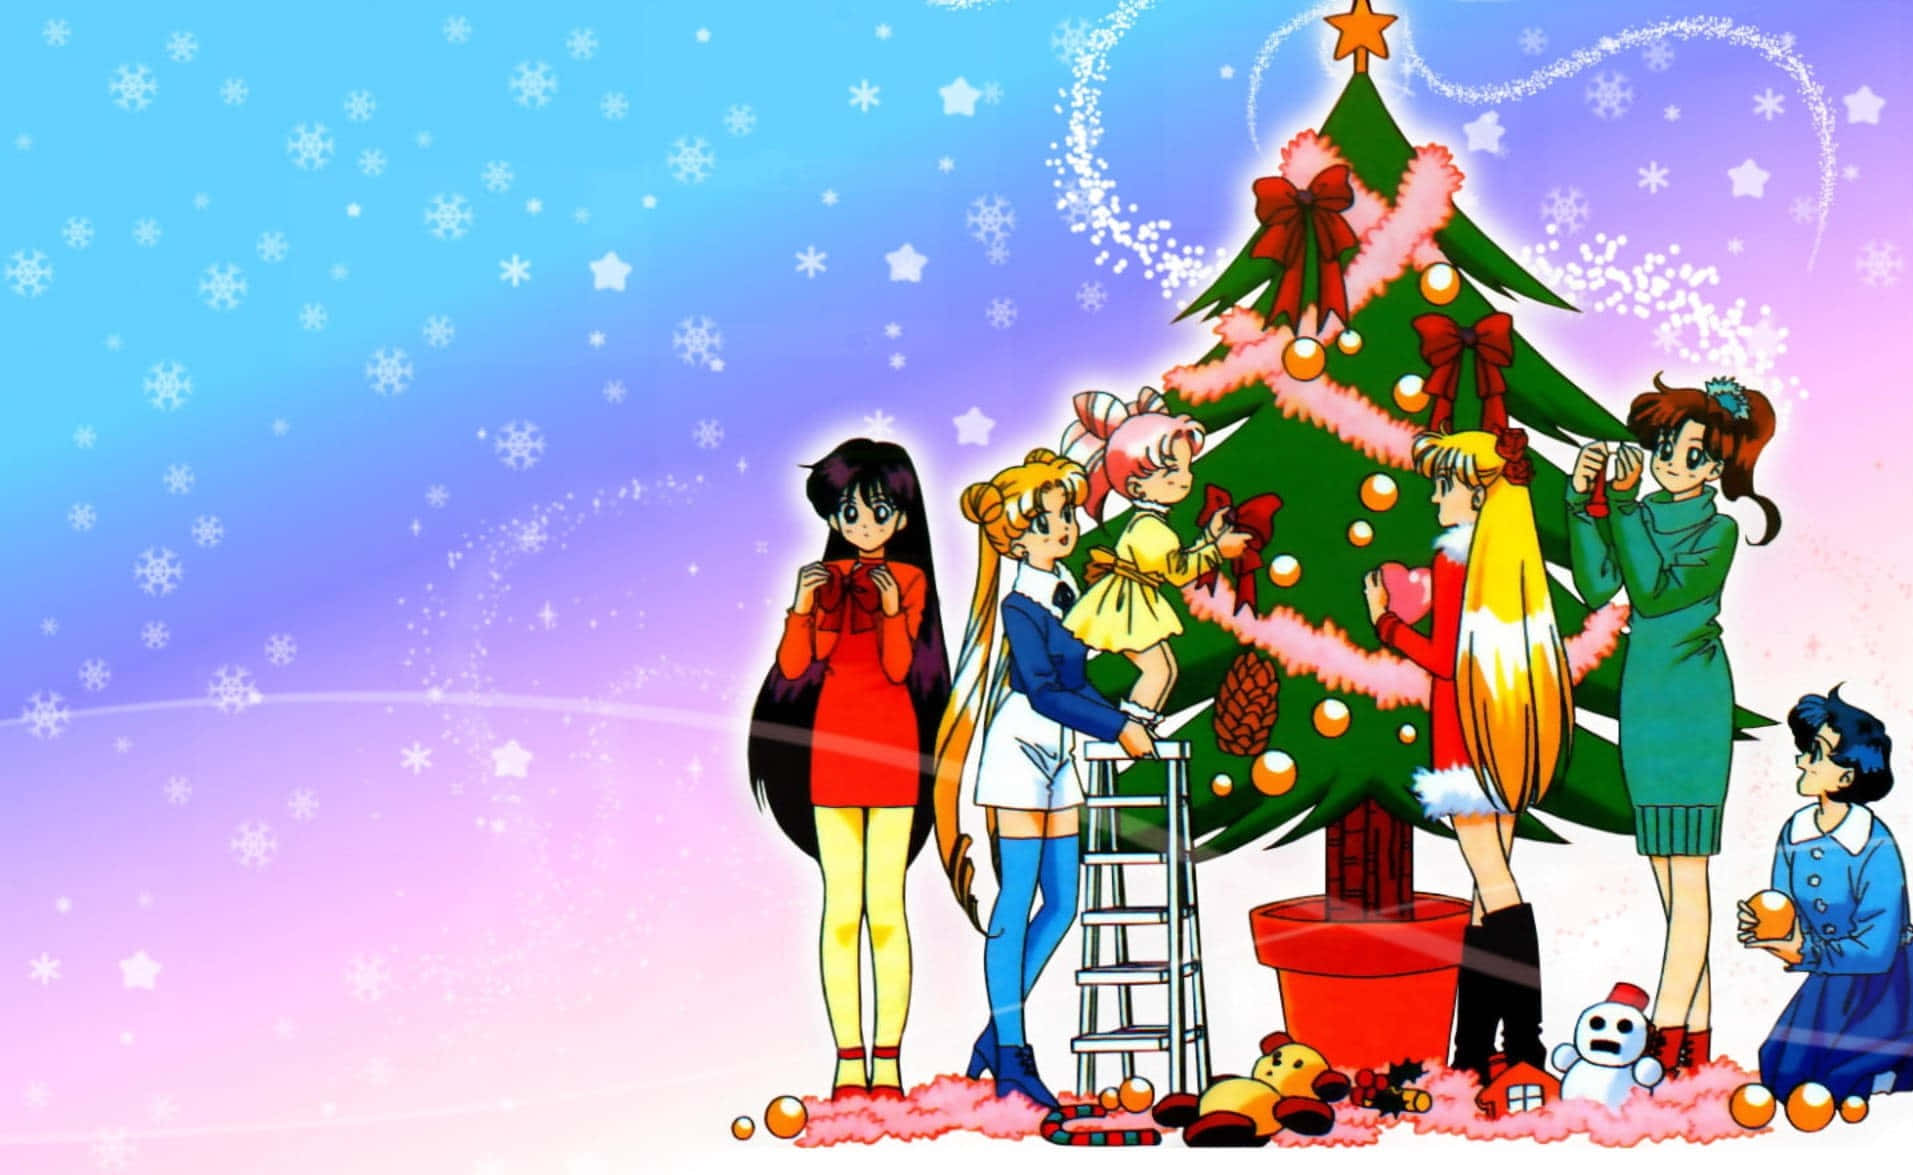 Celebrate the holidays with a special Anime Christmas!